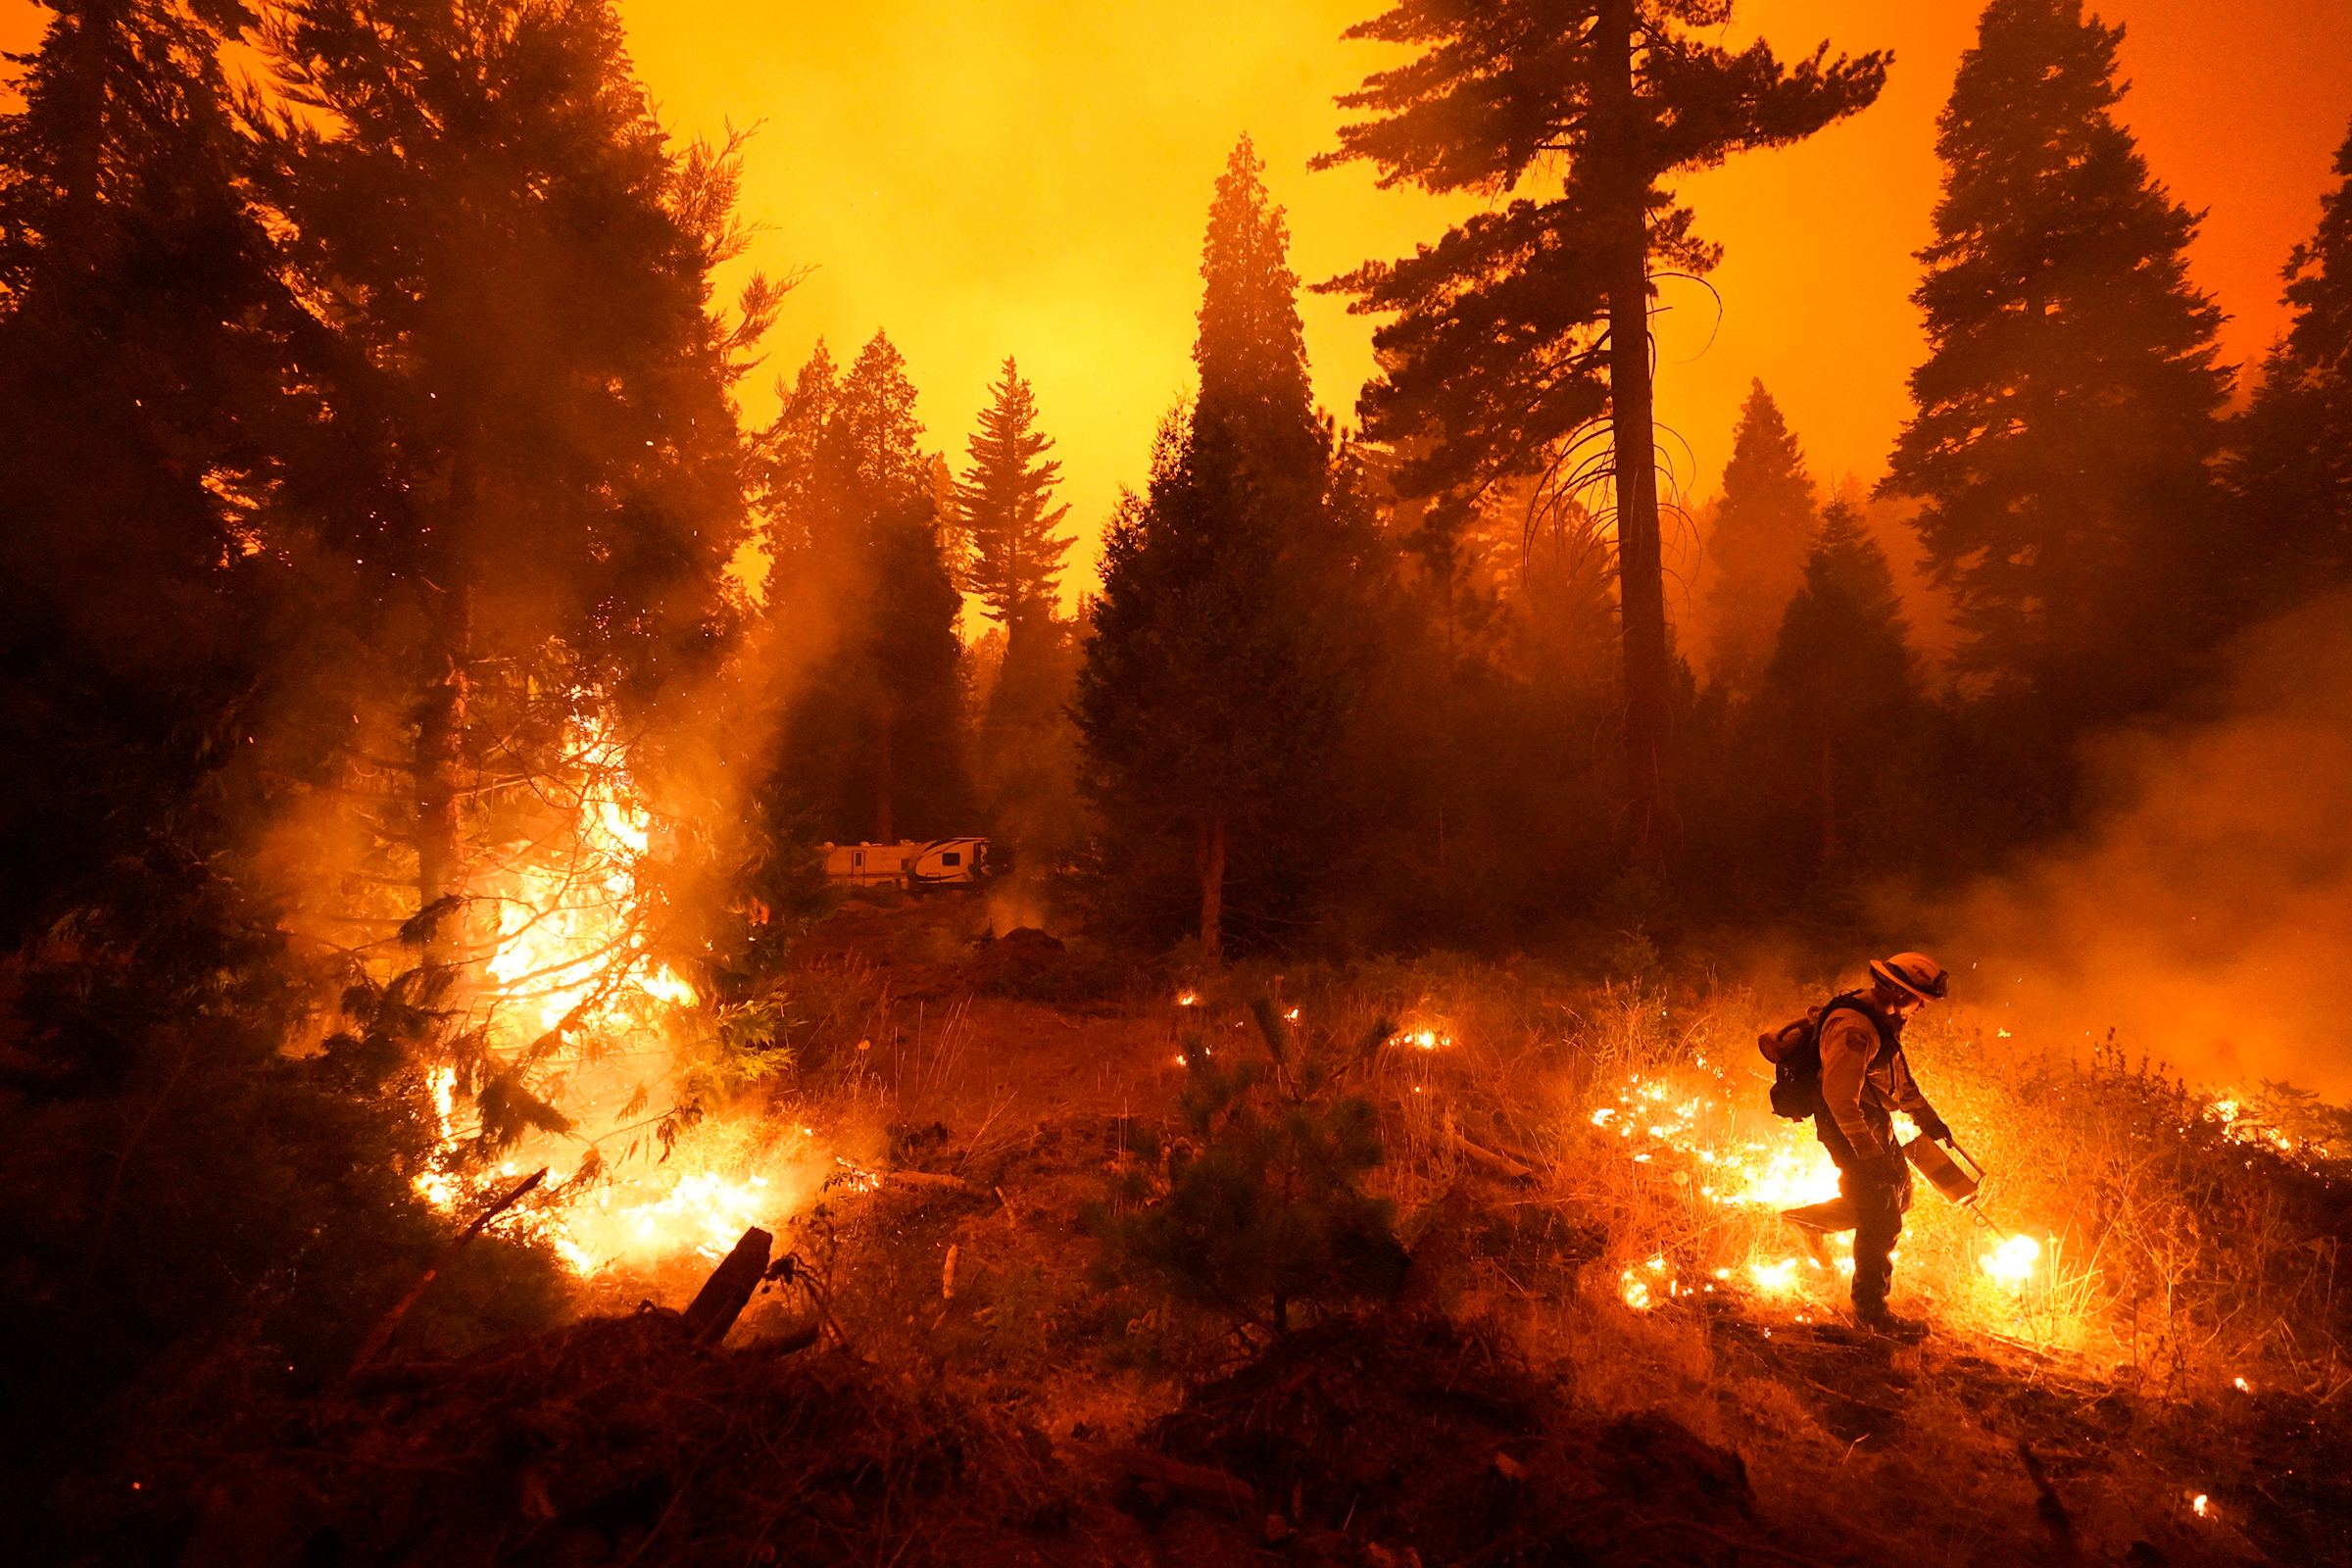 Firefighter Ricardo Gomez, part of a San Benito Monterey Cal Fire crew, sets a controlled burn with a drip torch while fighting the Creek Fire in Shaver Lake, Calif., on Sept. 6, 2020. (Marcio Jose Sanchez—AP.)